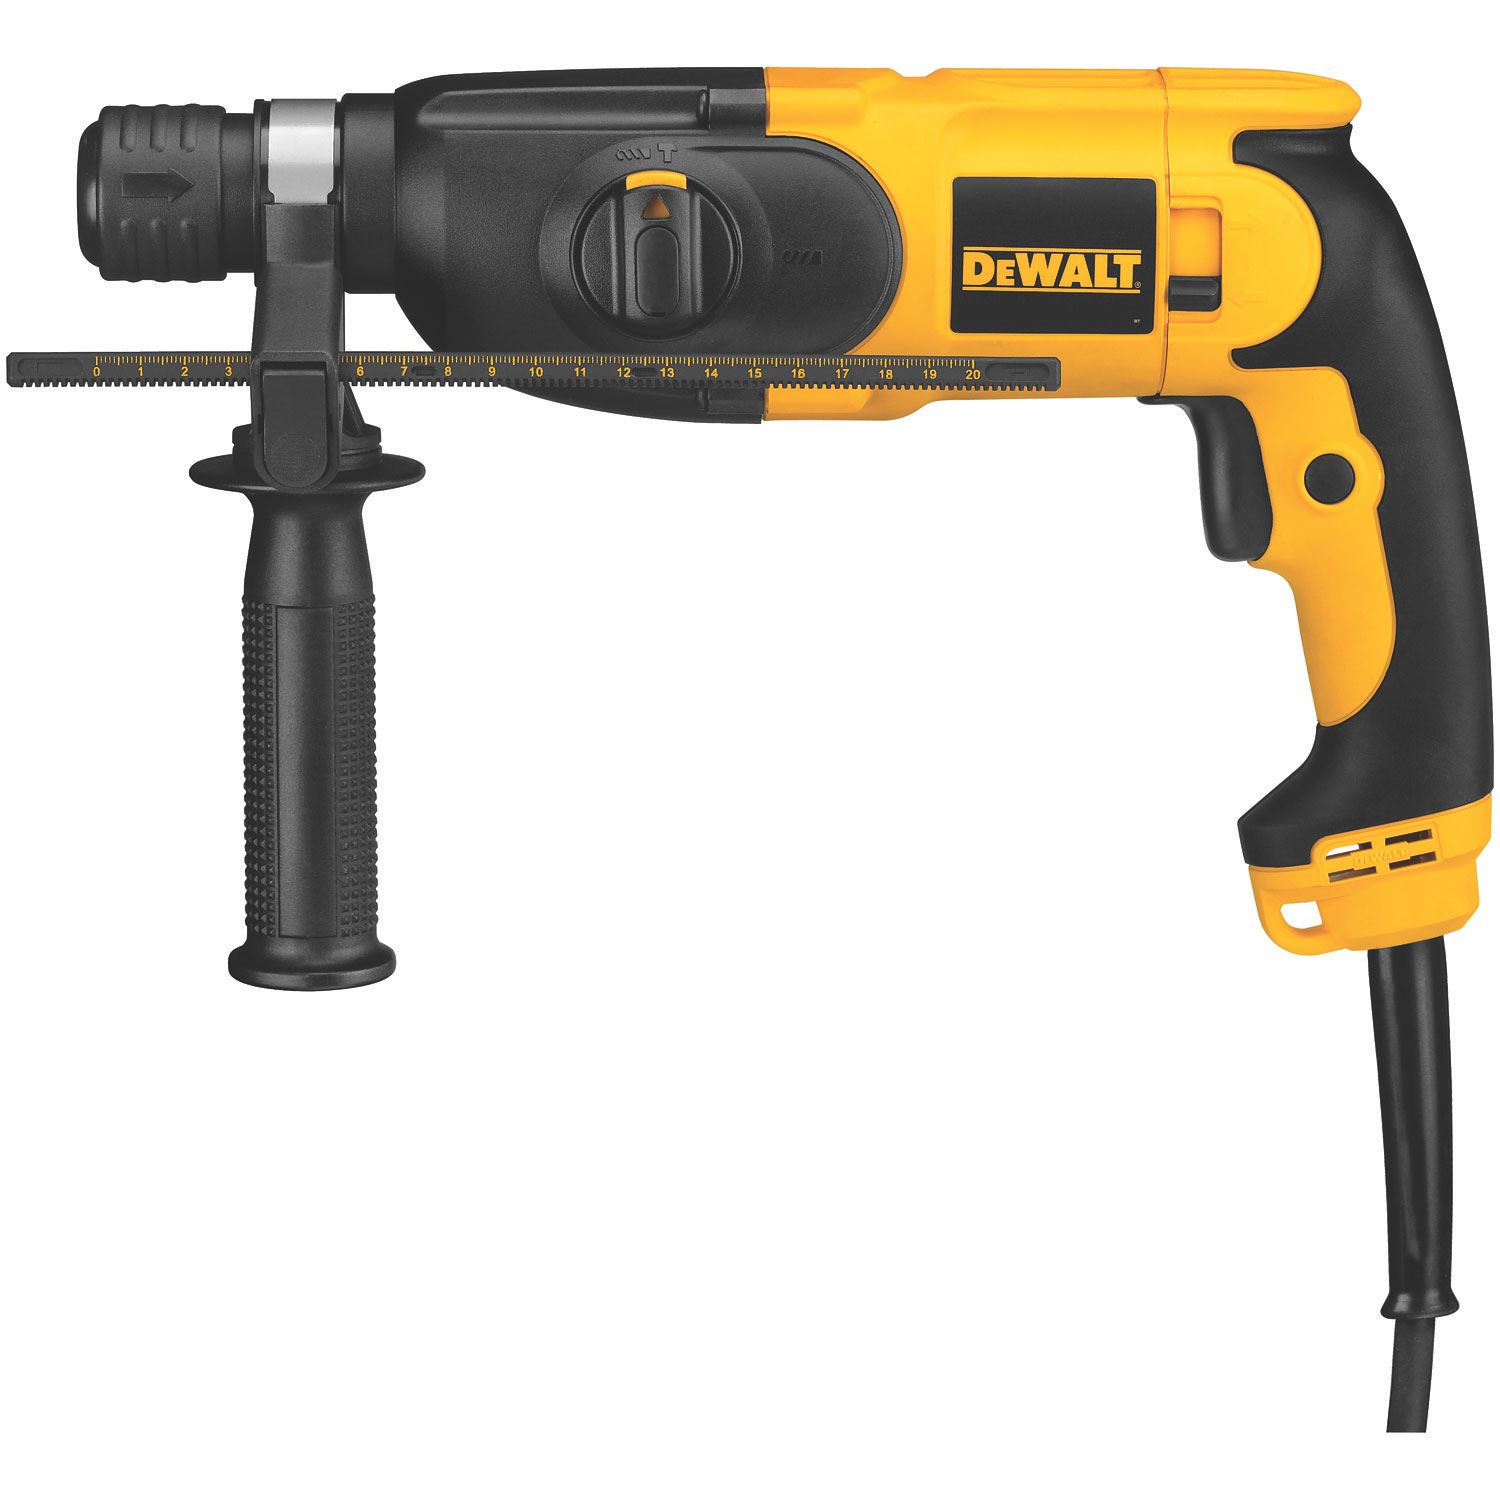 https://www.220stores.com/resize/Shared/Images/Product/DeWalt-220-Voltage-Rotary-Hammer-Drill/d25012k_1.jpg?